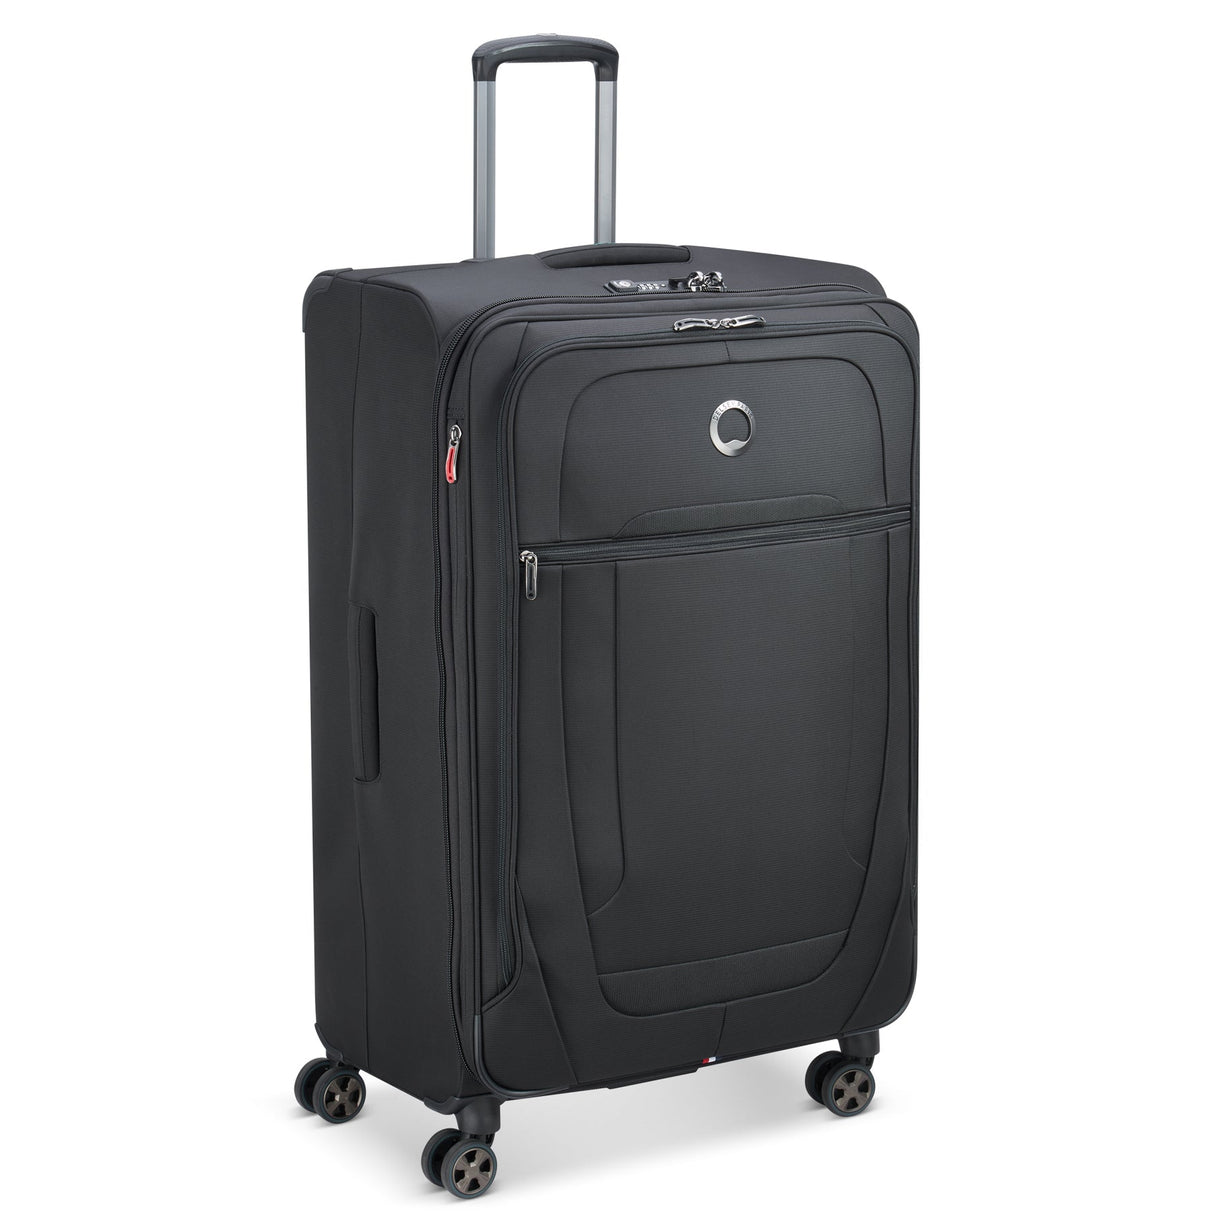 Delsey Helium DLX Large Checked Expandable Spinner , , delsey-helium-dlx-40239783000-02_1800x1800_2400ed8e-1834-4df2-b4f3-a7ec0feda03e